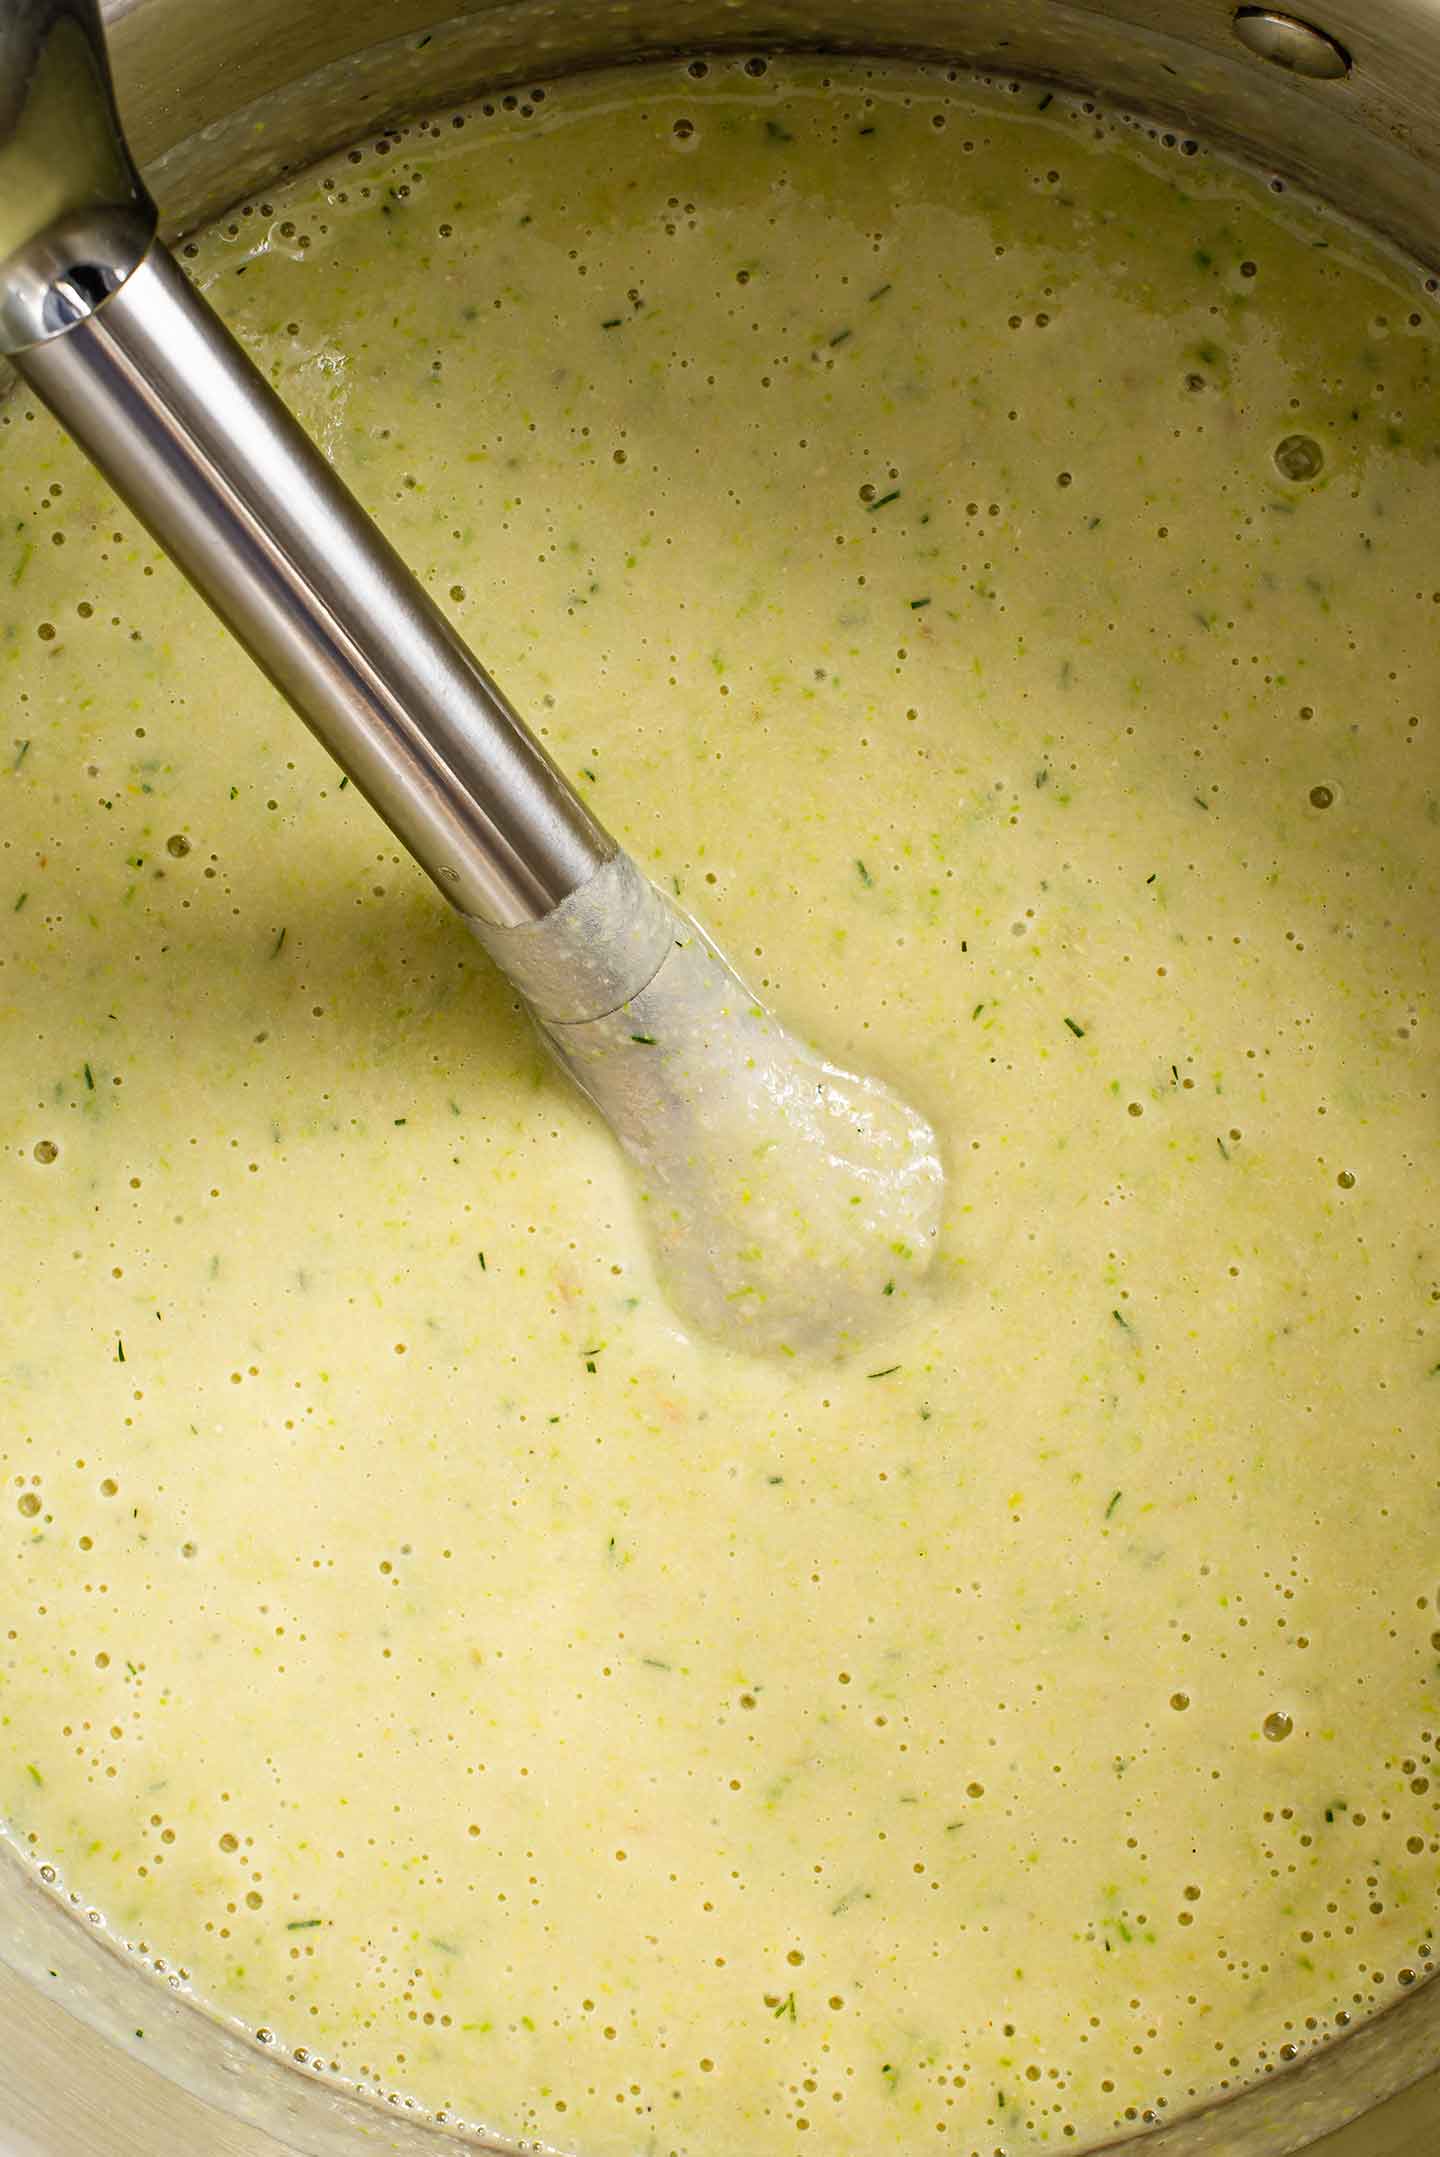 Top down view of an immersion blender in smooth, creamy soup. The soup is still speckled with bits of green from the fresh dill and asparagus.